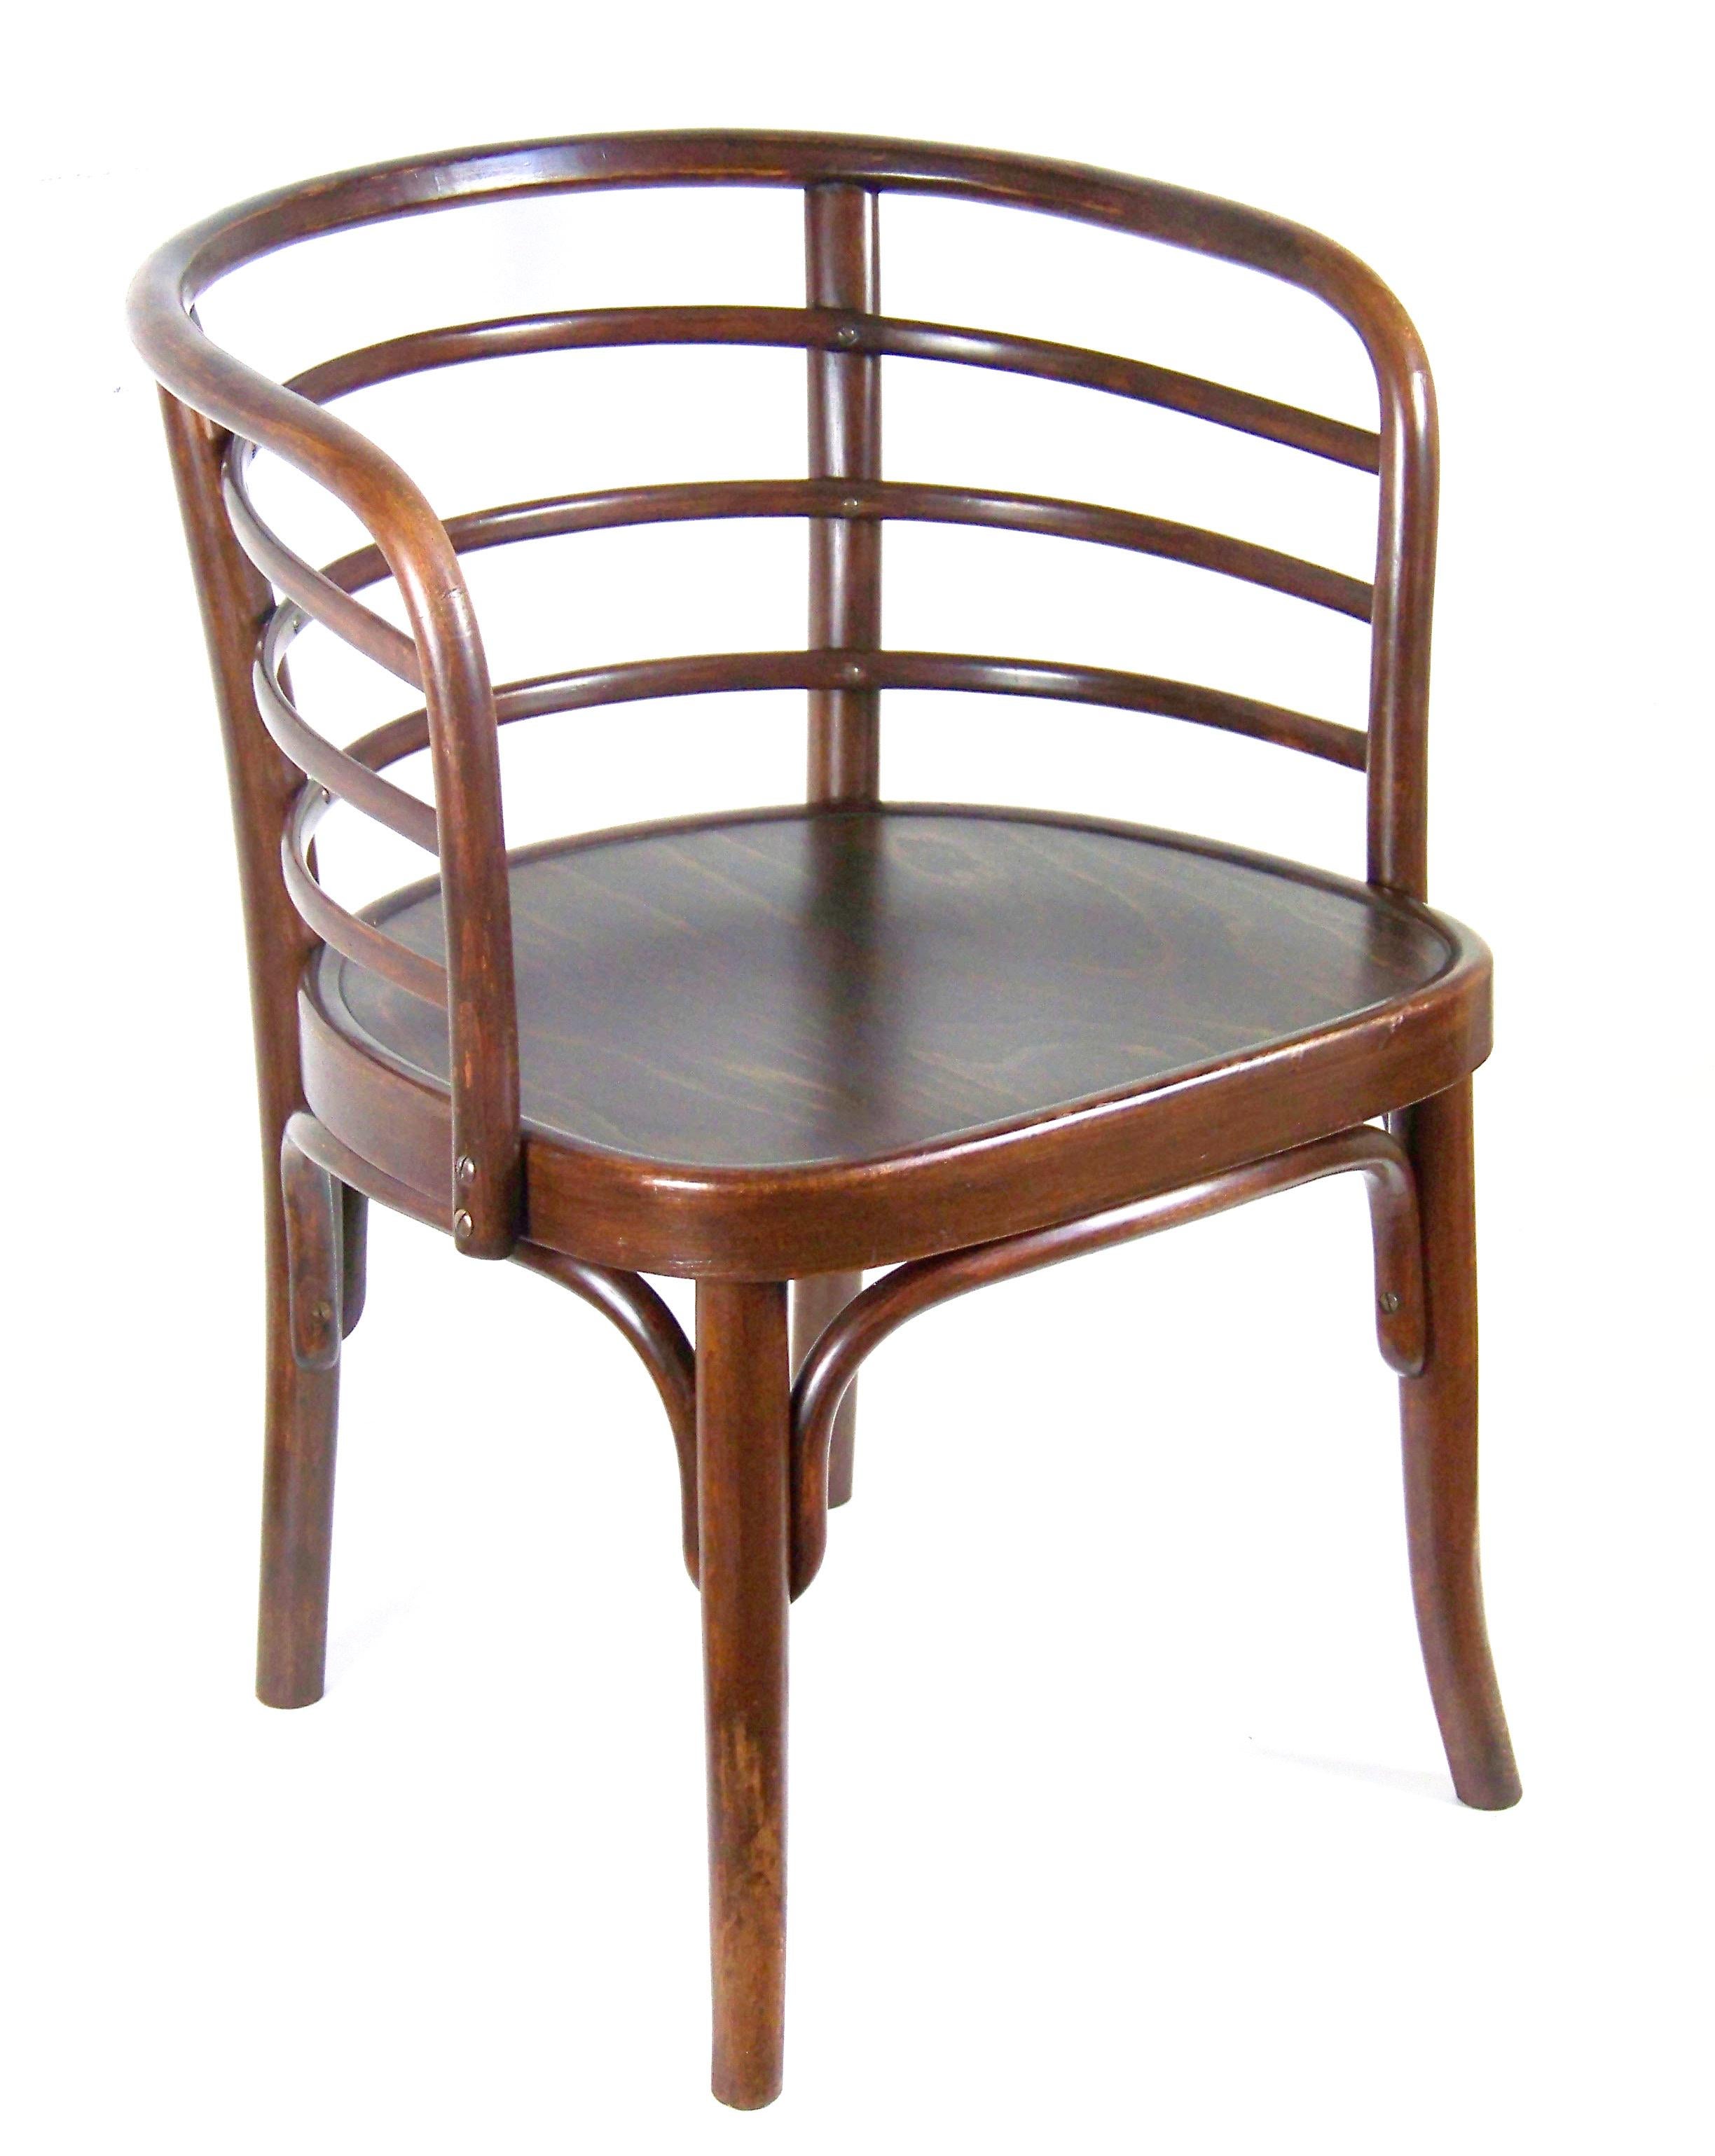 Very good state with a pleasant patine of age, perfectly cleaned and re-polished with shellac polish, plywood seat is new.